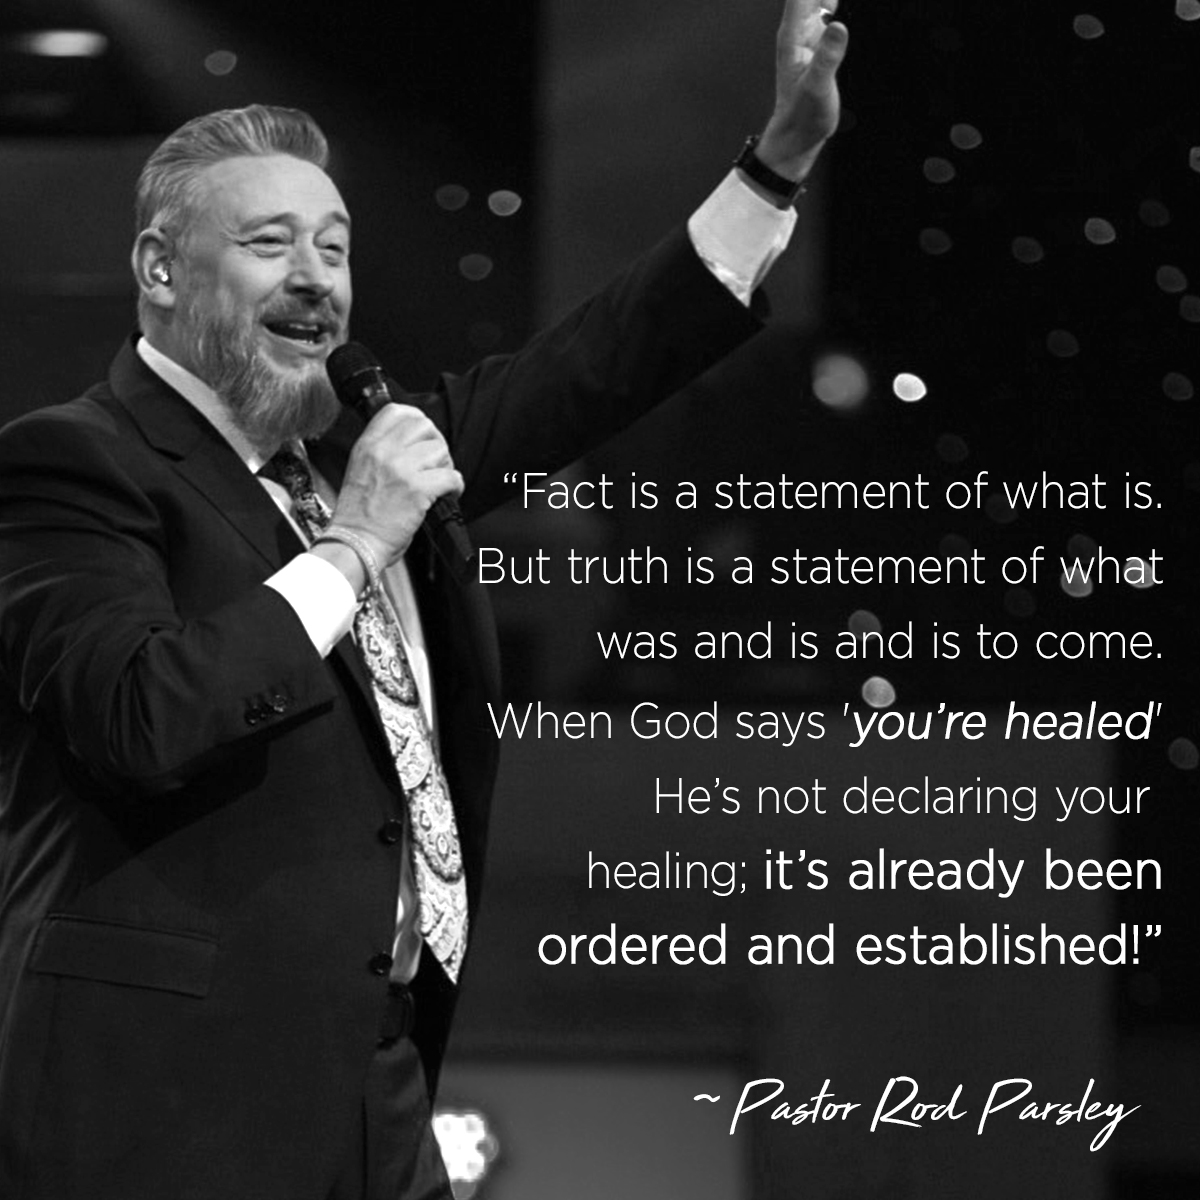 “Fact is a statement of what is. But truth is a statement of what was and is and is to come. When God says ’you’re healed’ He’s not declaring your healing; it’s already been ordered and established!” – Pastor Rod Parsley